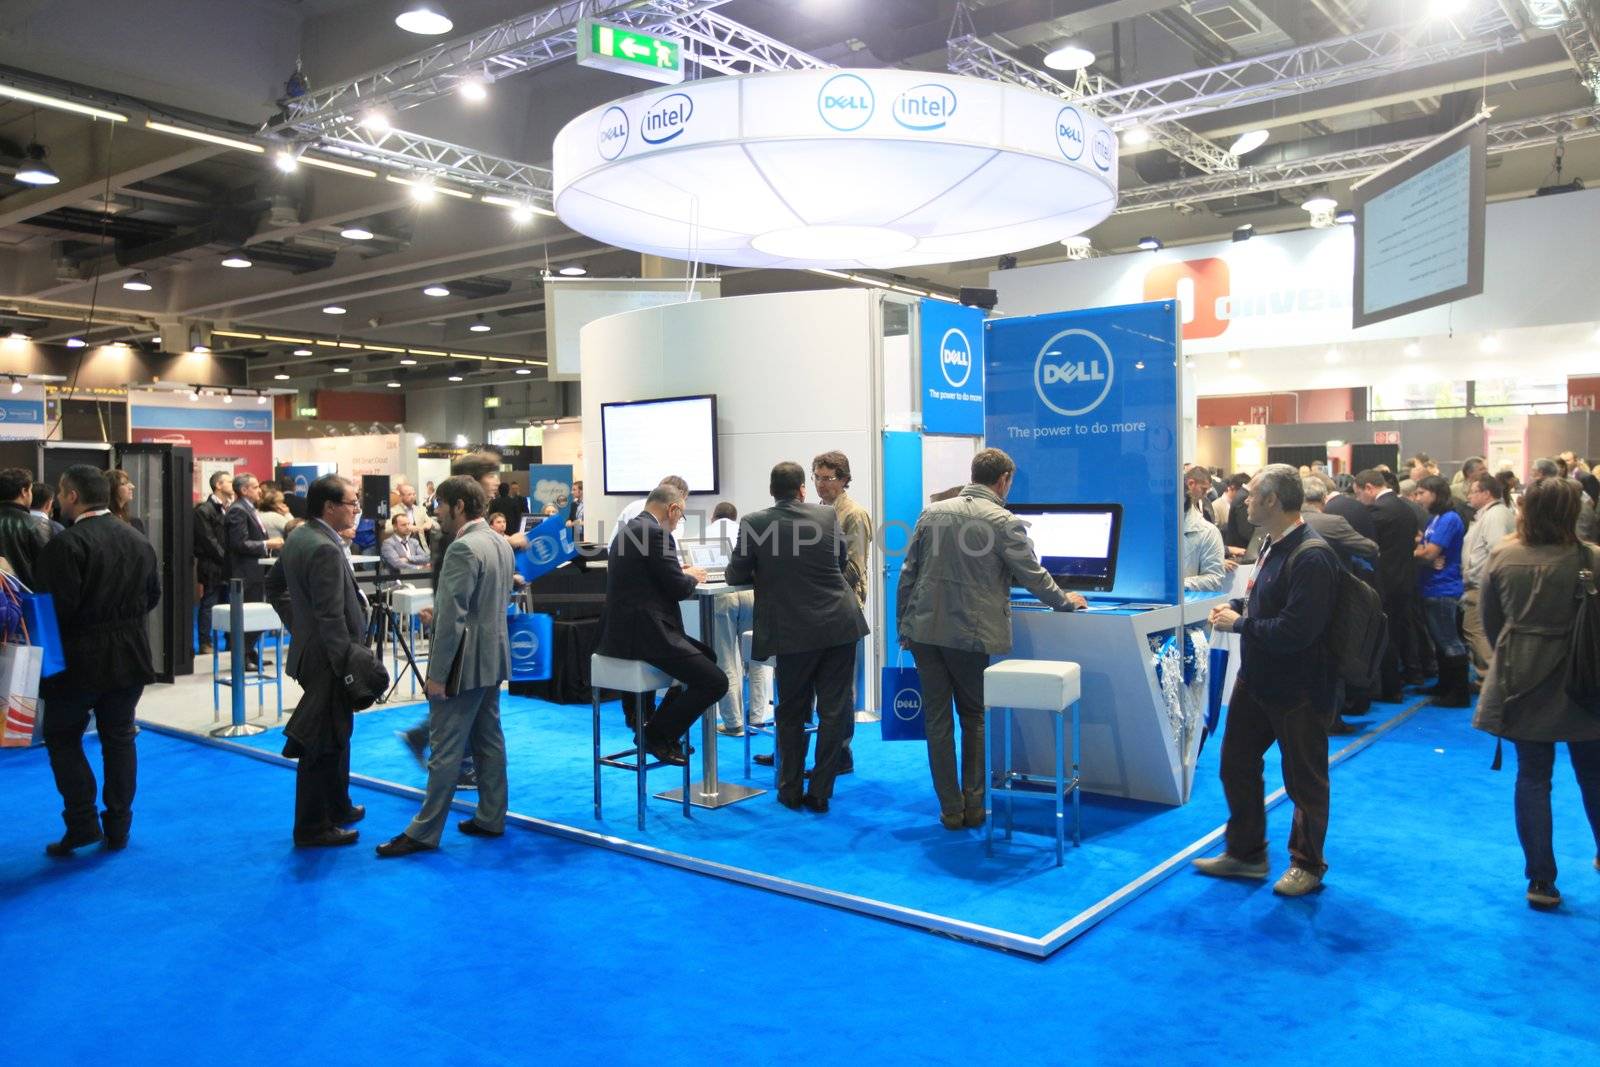 MILAN, ITALY - OCTOBER 17: People visit Intel technologies products exhibition area at SMAU, international fair of business intelligence and information technology October 17, 2012 in Milan, Italy.